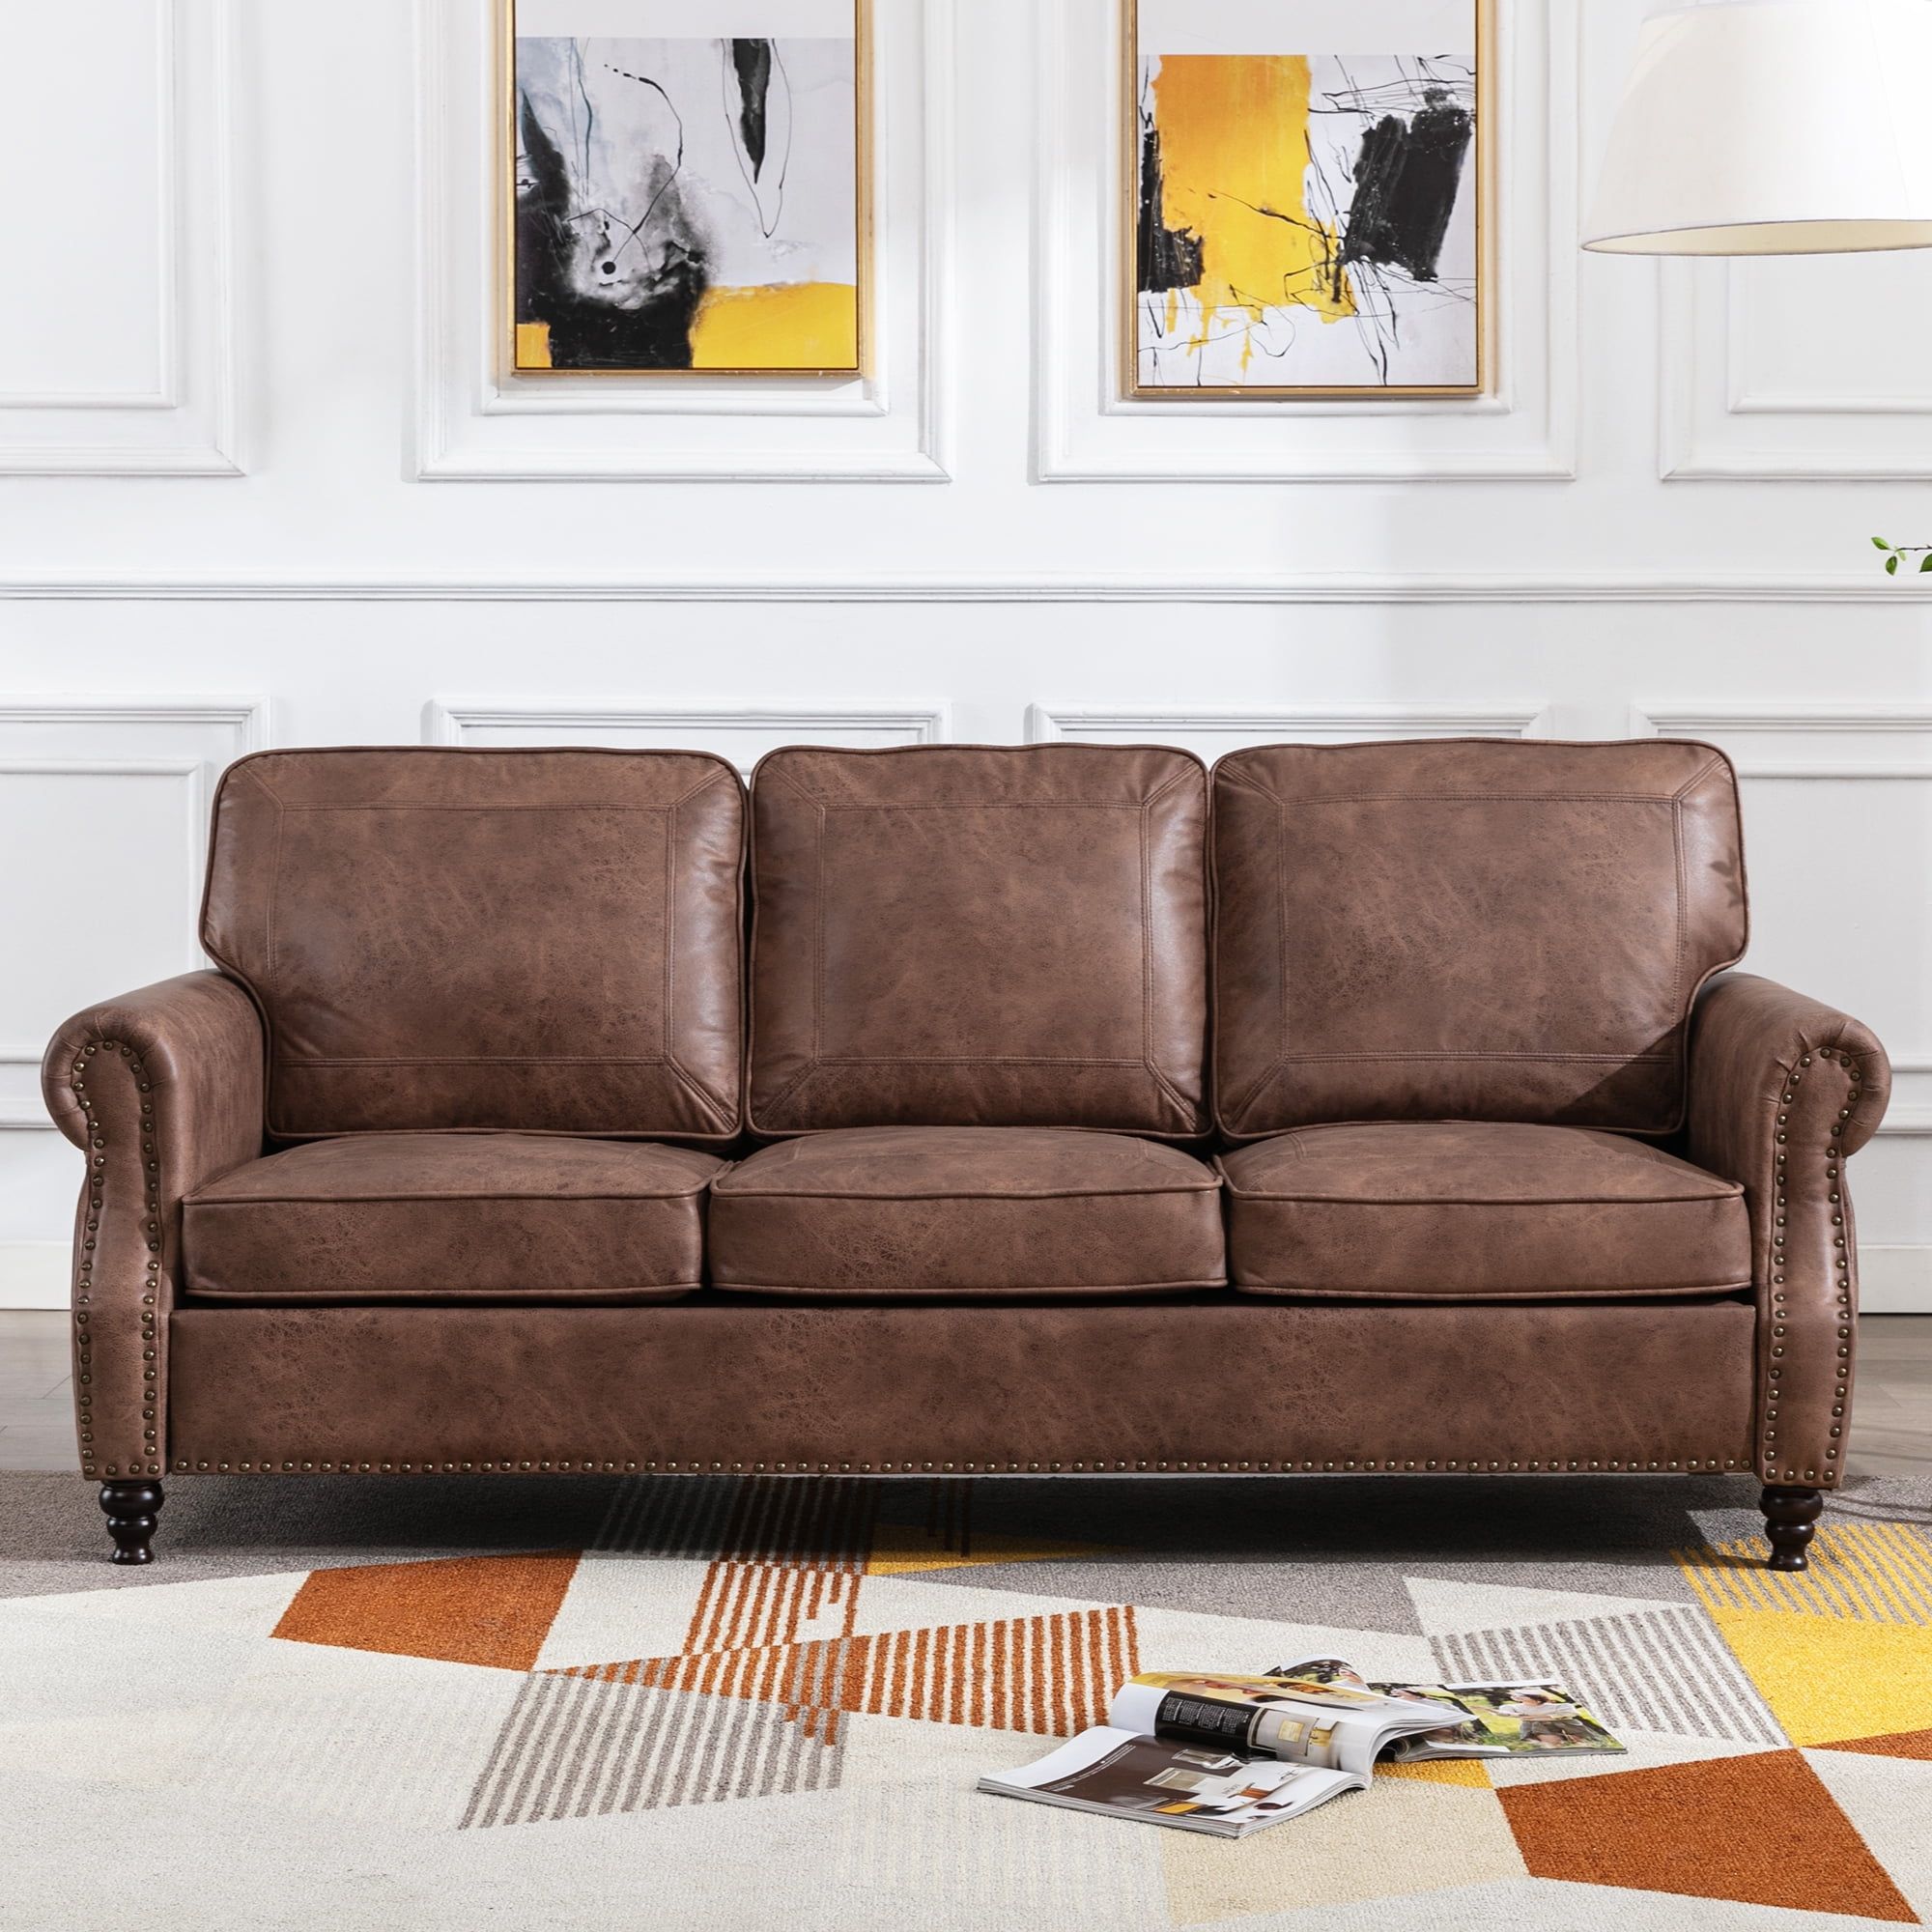 Dreamsir 80" Faux Leather Sofa Couch – Traditional 3 Seater With Nailhead  Trim, Rolled Arms, And Easy Assembly (dark Brown) – Walmart With Faux Leather Sofas (View 2 of 15)